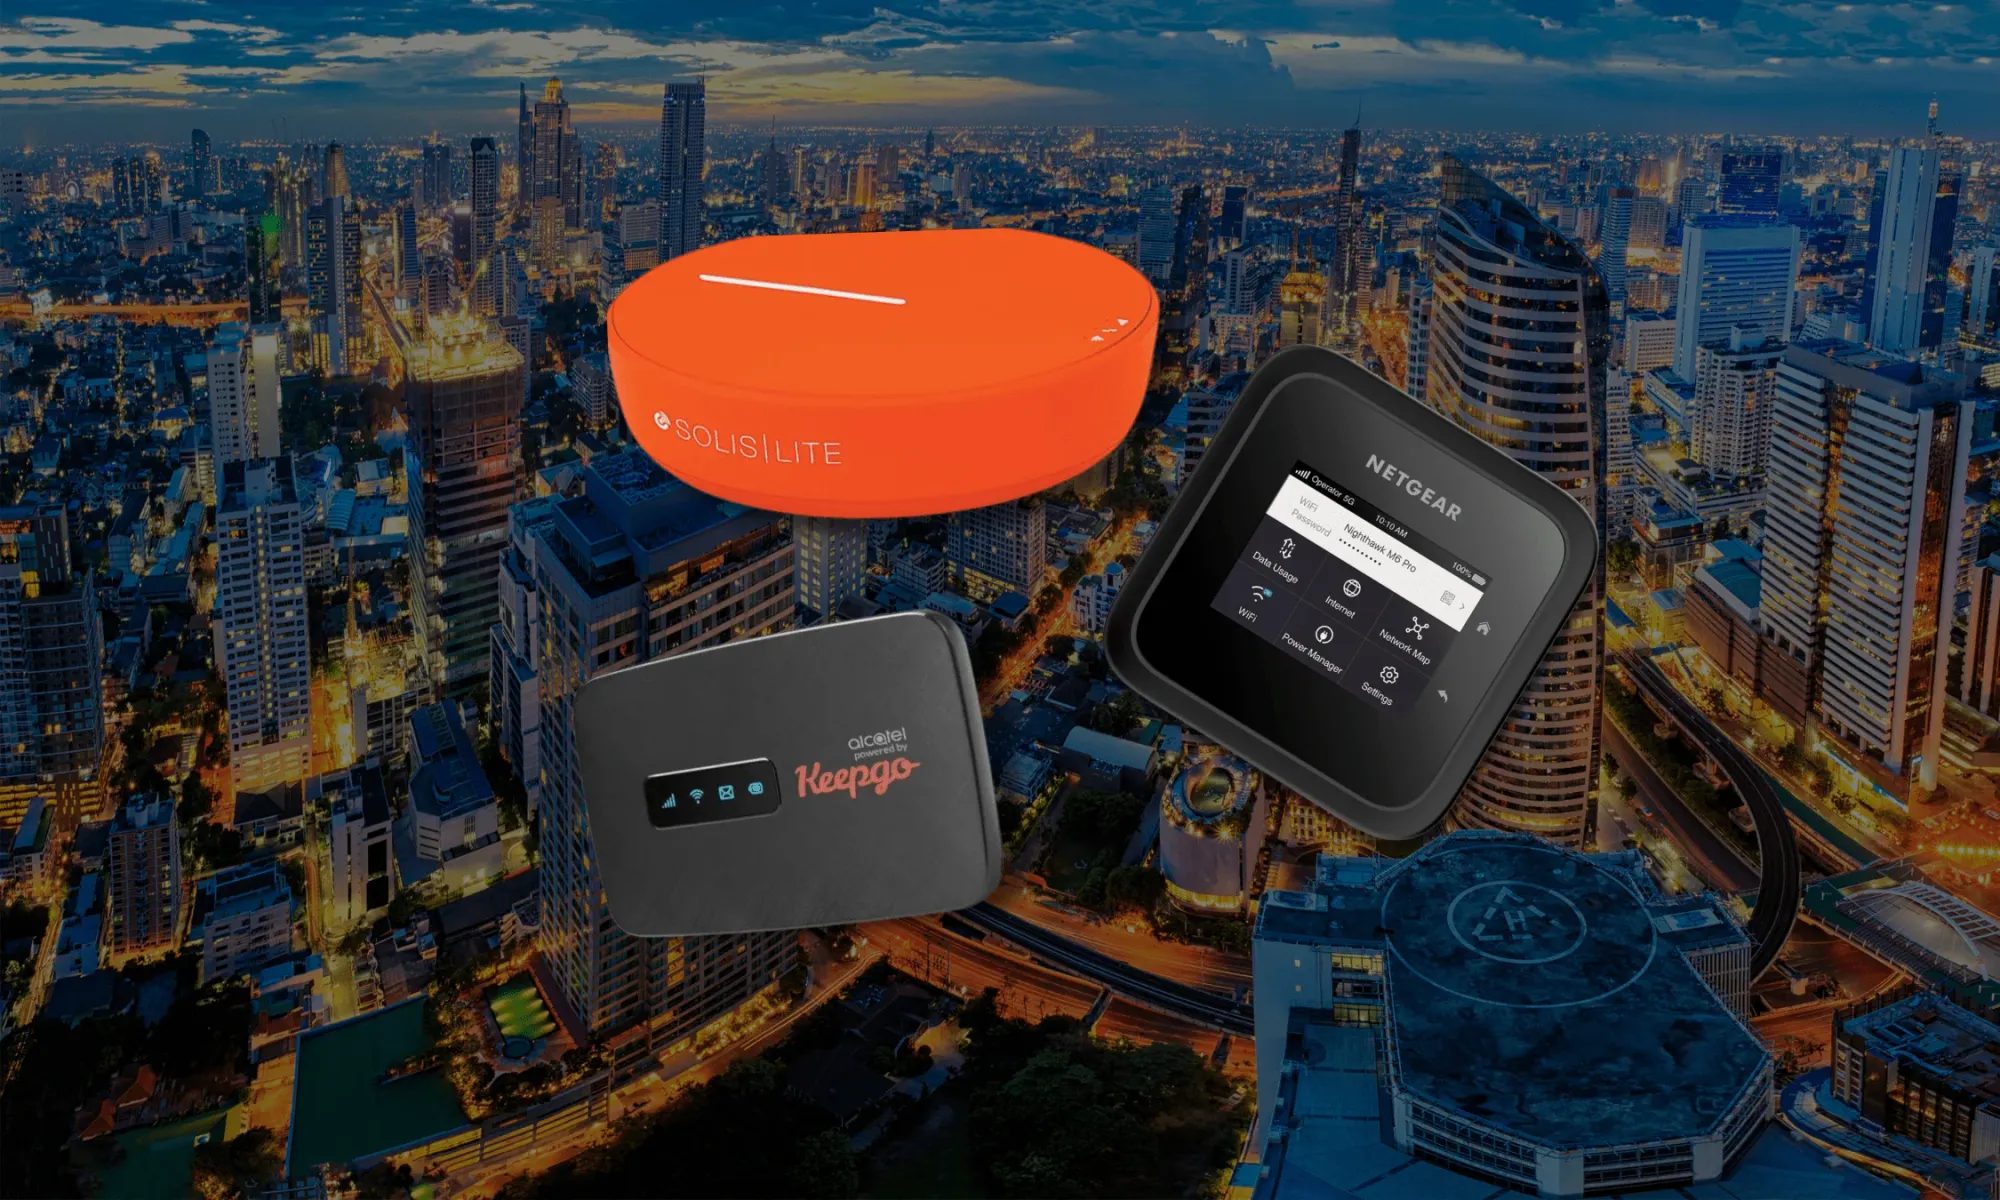 Portable WiFi Hotspot with Bangkok in the background